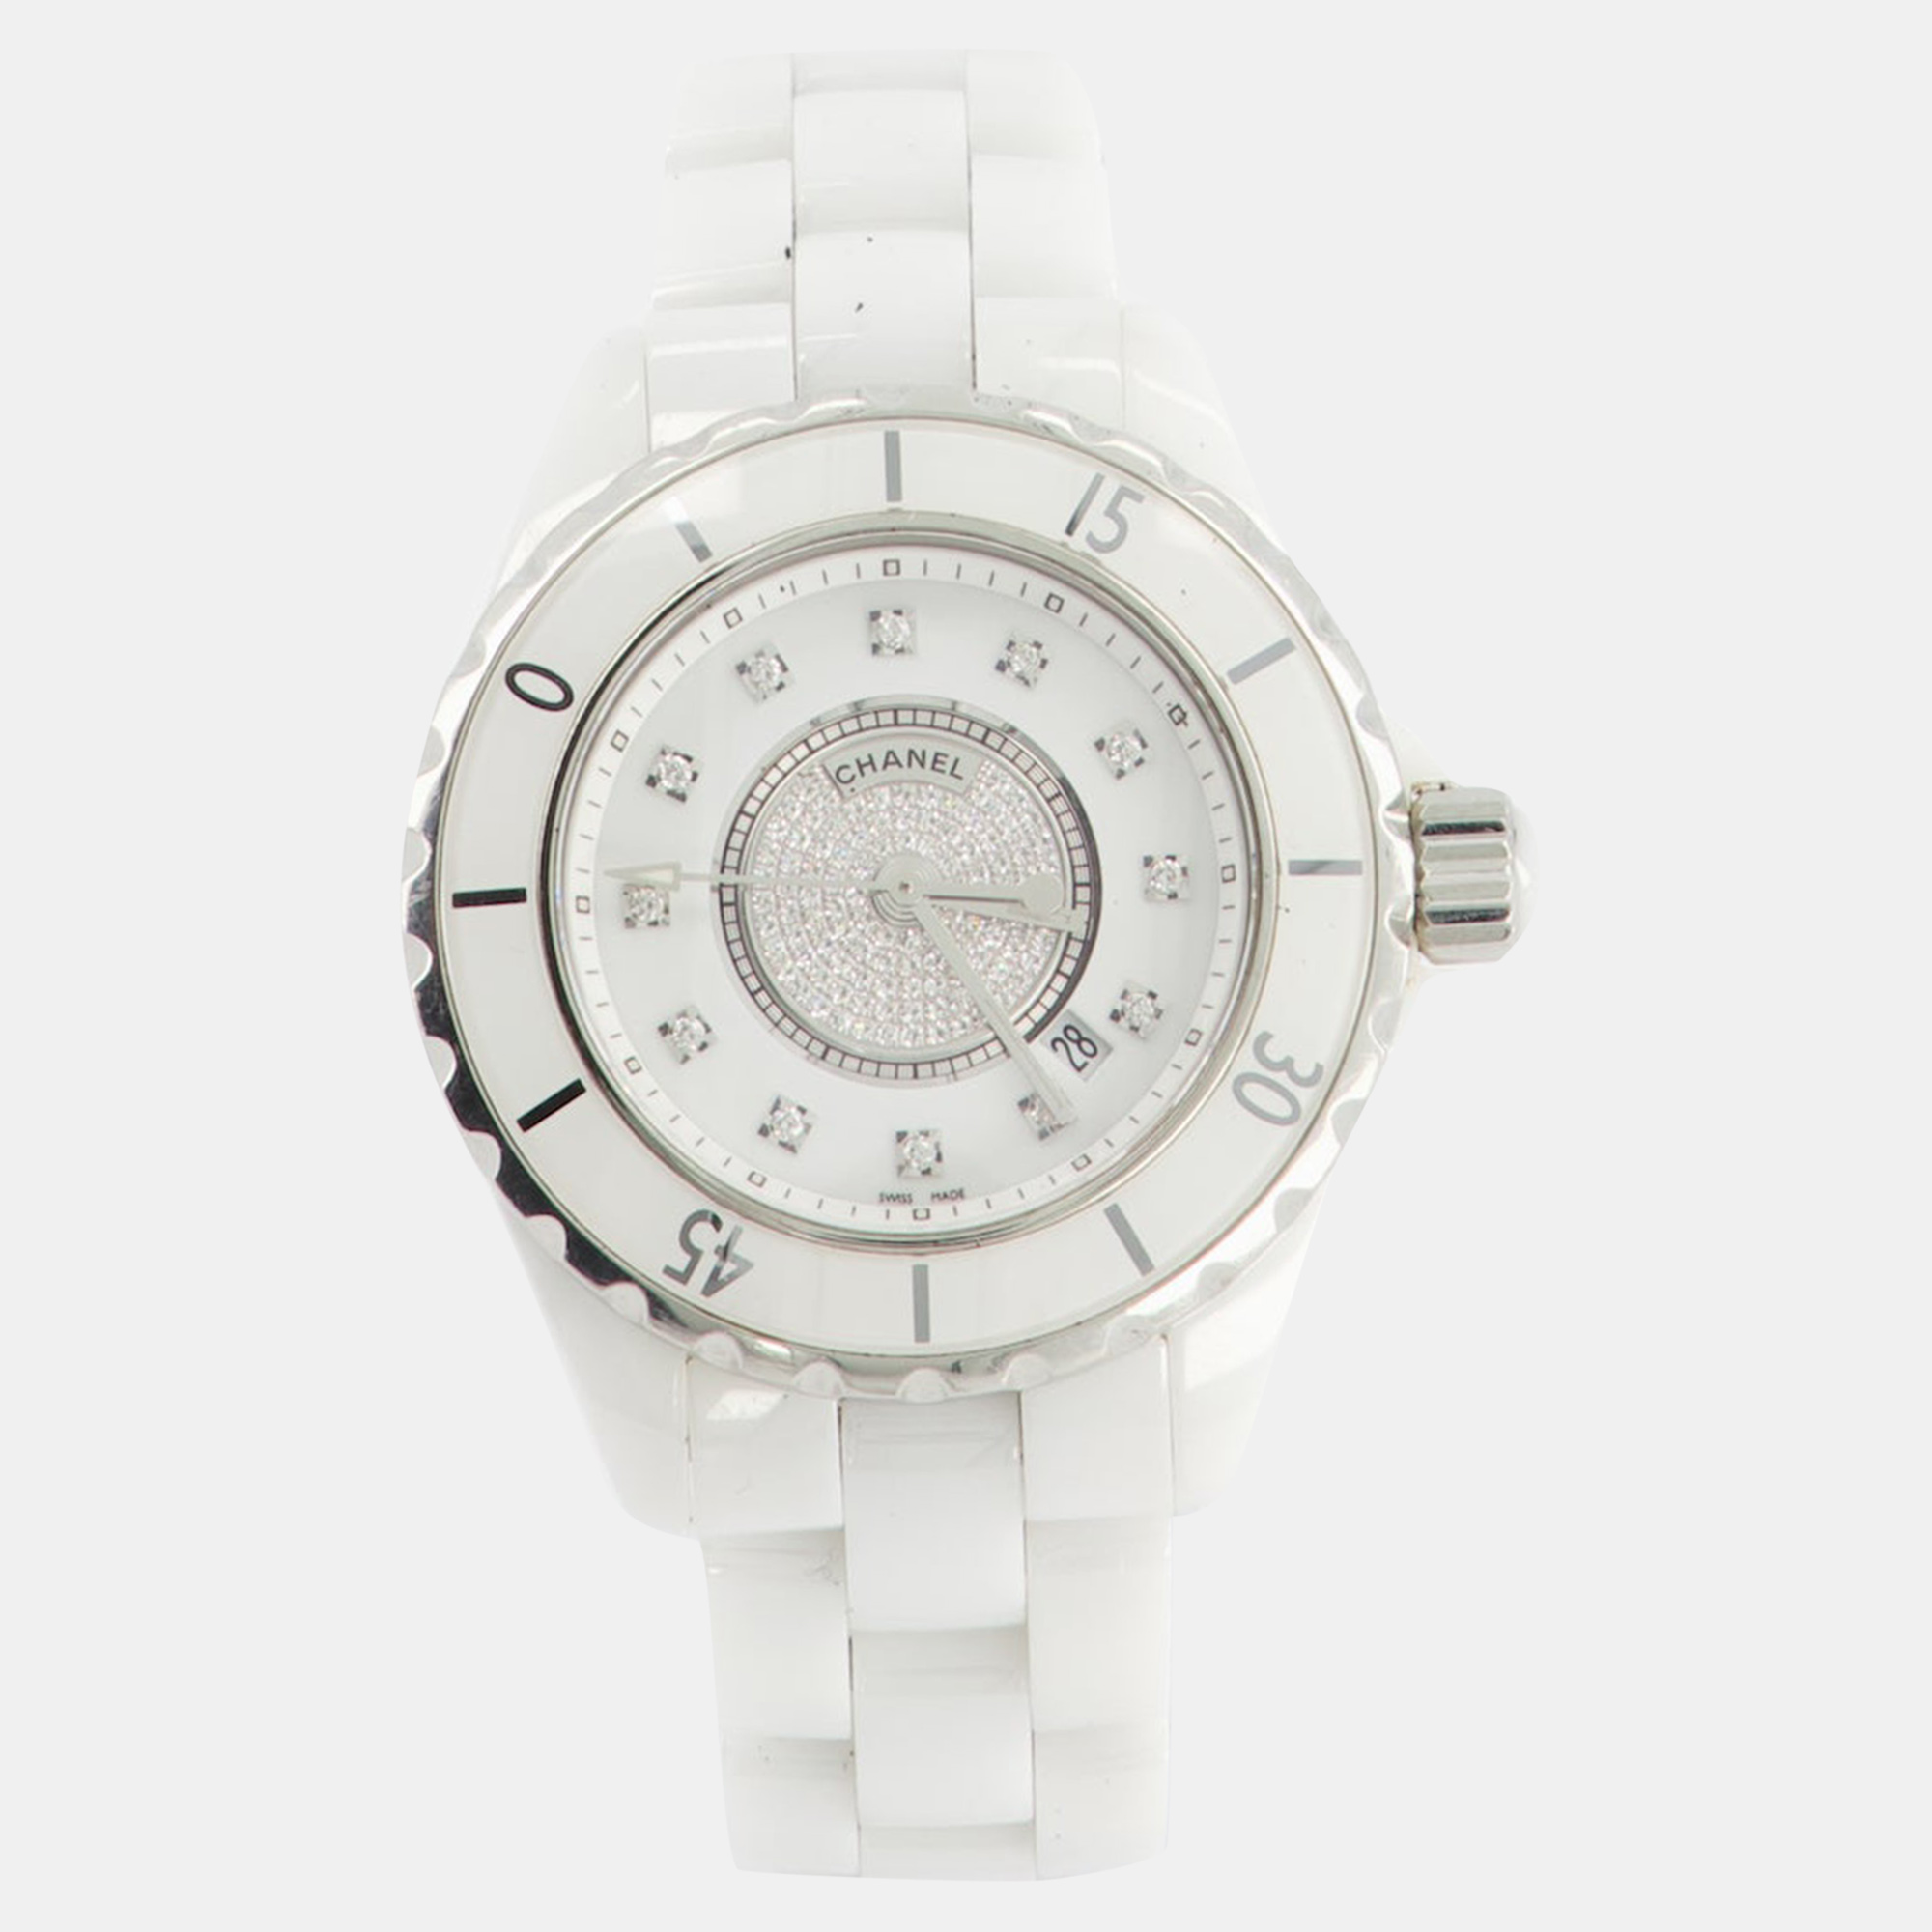 Pre-owned Chanel J12 White Ceramic Watch With Ceramic Diamond Dial And Silver Hardware